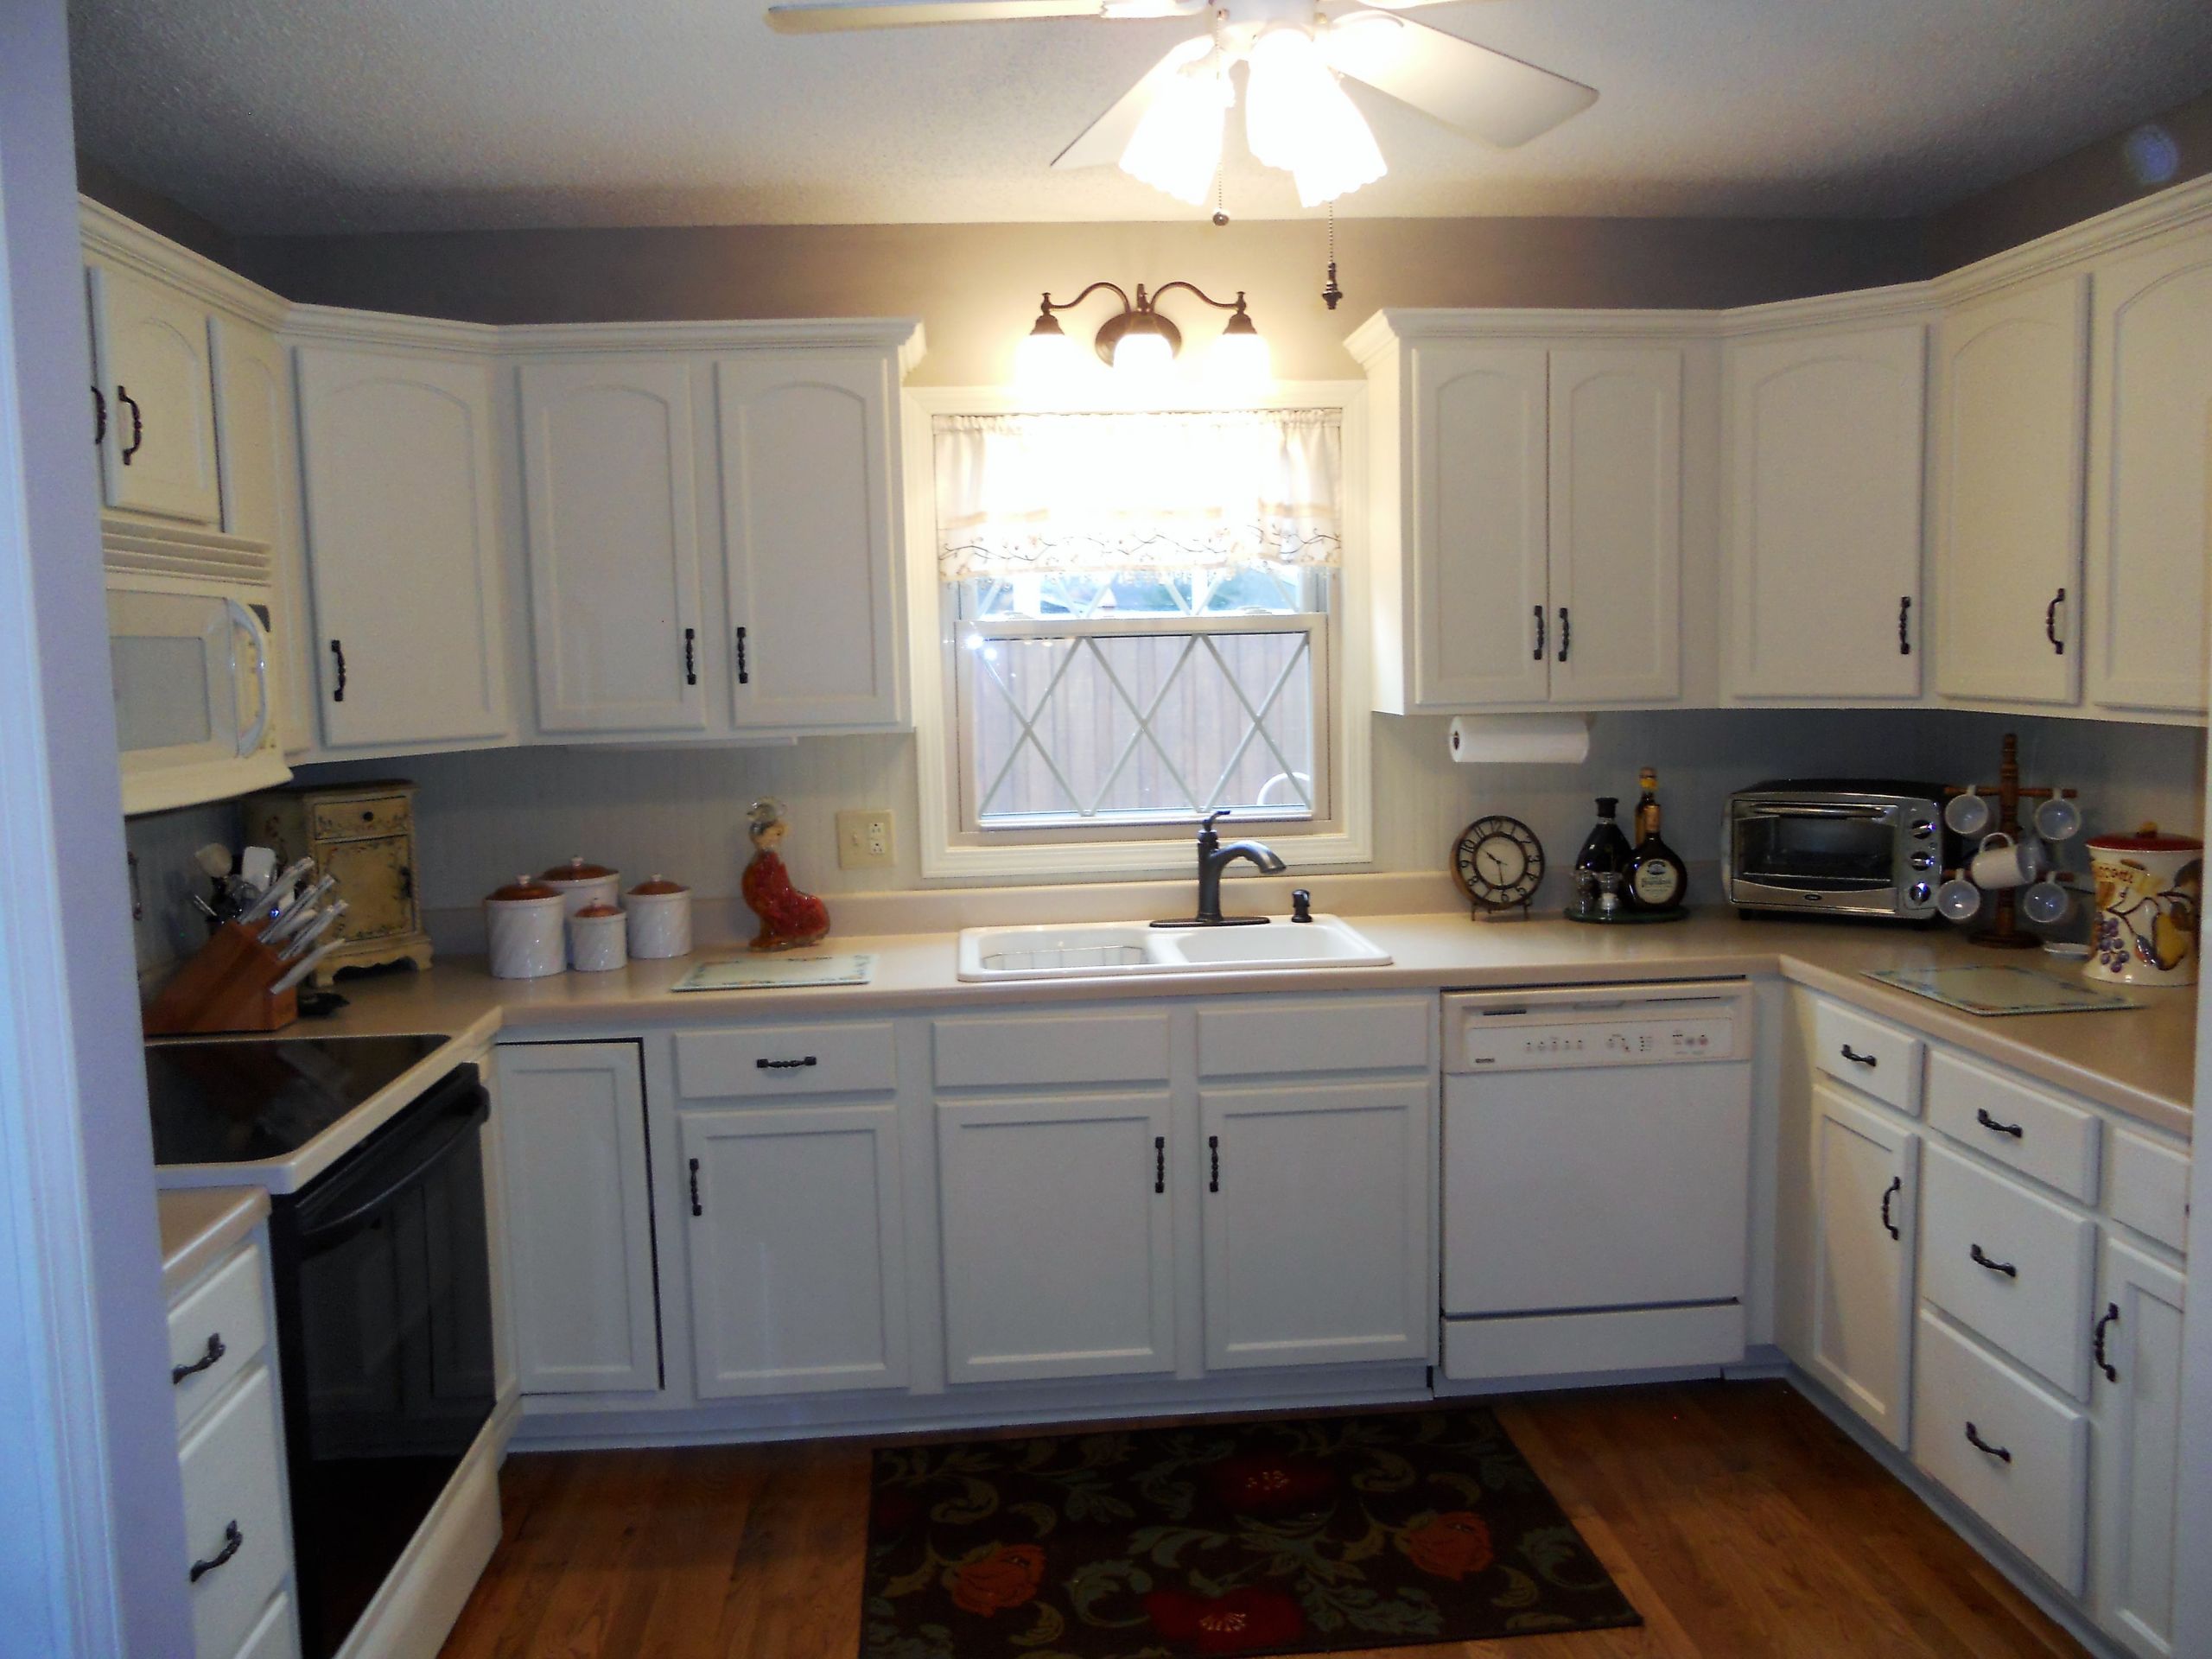 Painting Kitchen Cabinets Antique White
 antique white painted kitchen cabinets after jan 2016 07